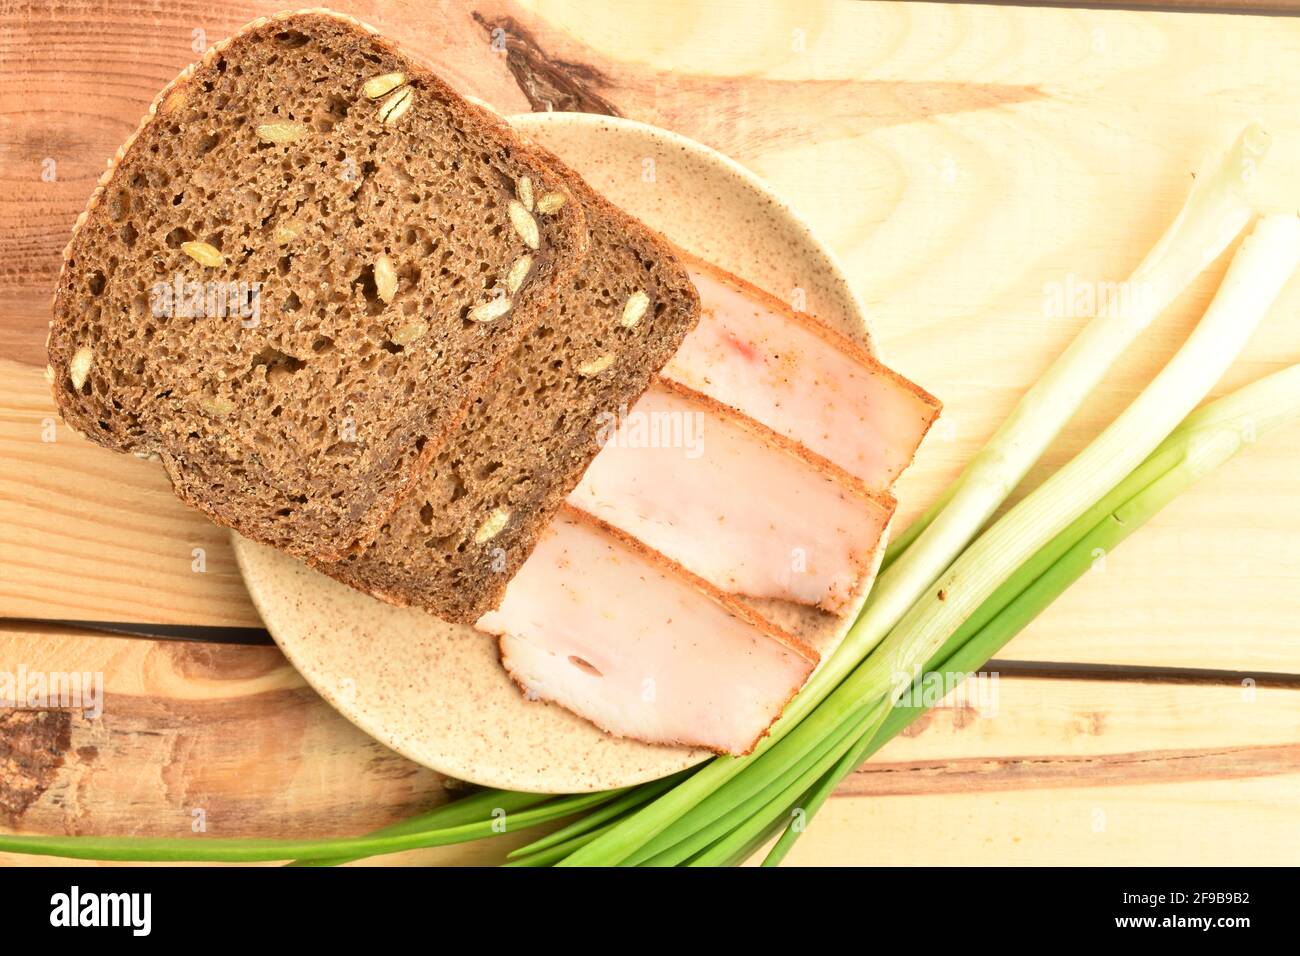 Three slices of delicious, calorie, tasty, piquant bacon with bread and fresh onions on a ceramic saucer, standing on a wooden table. Stock Photo